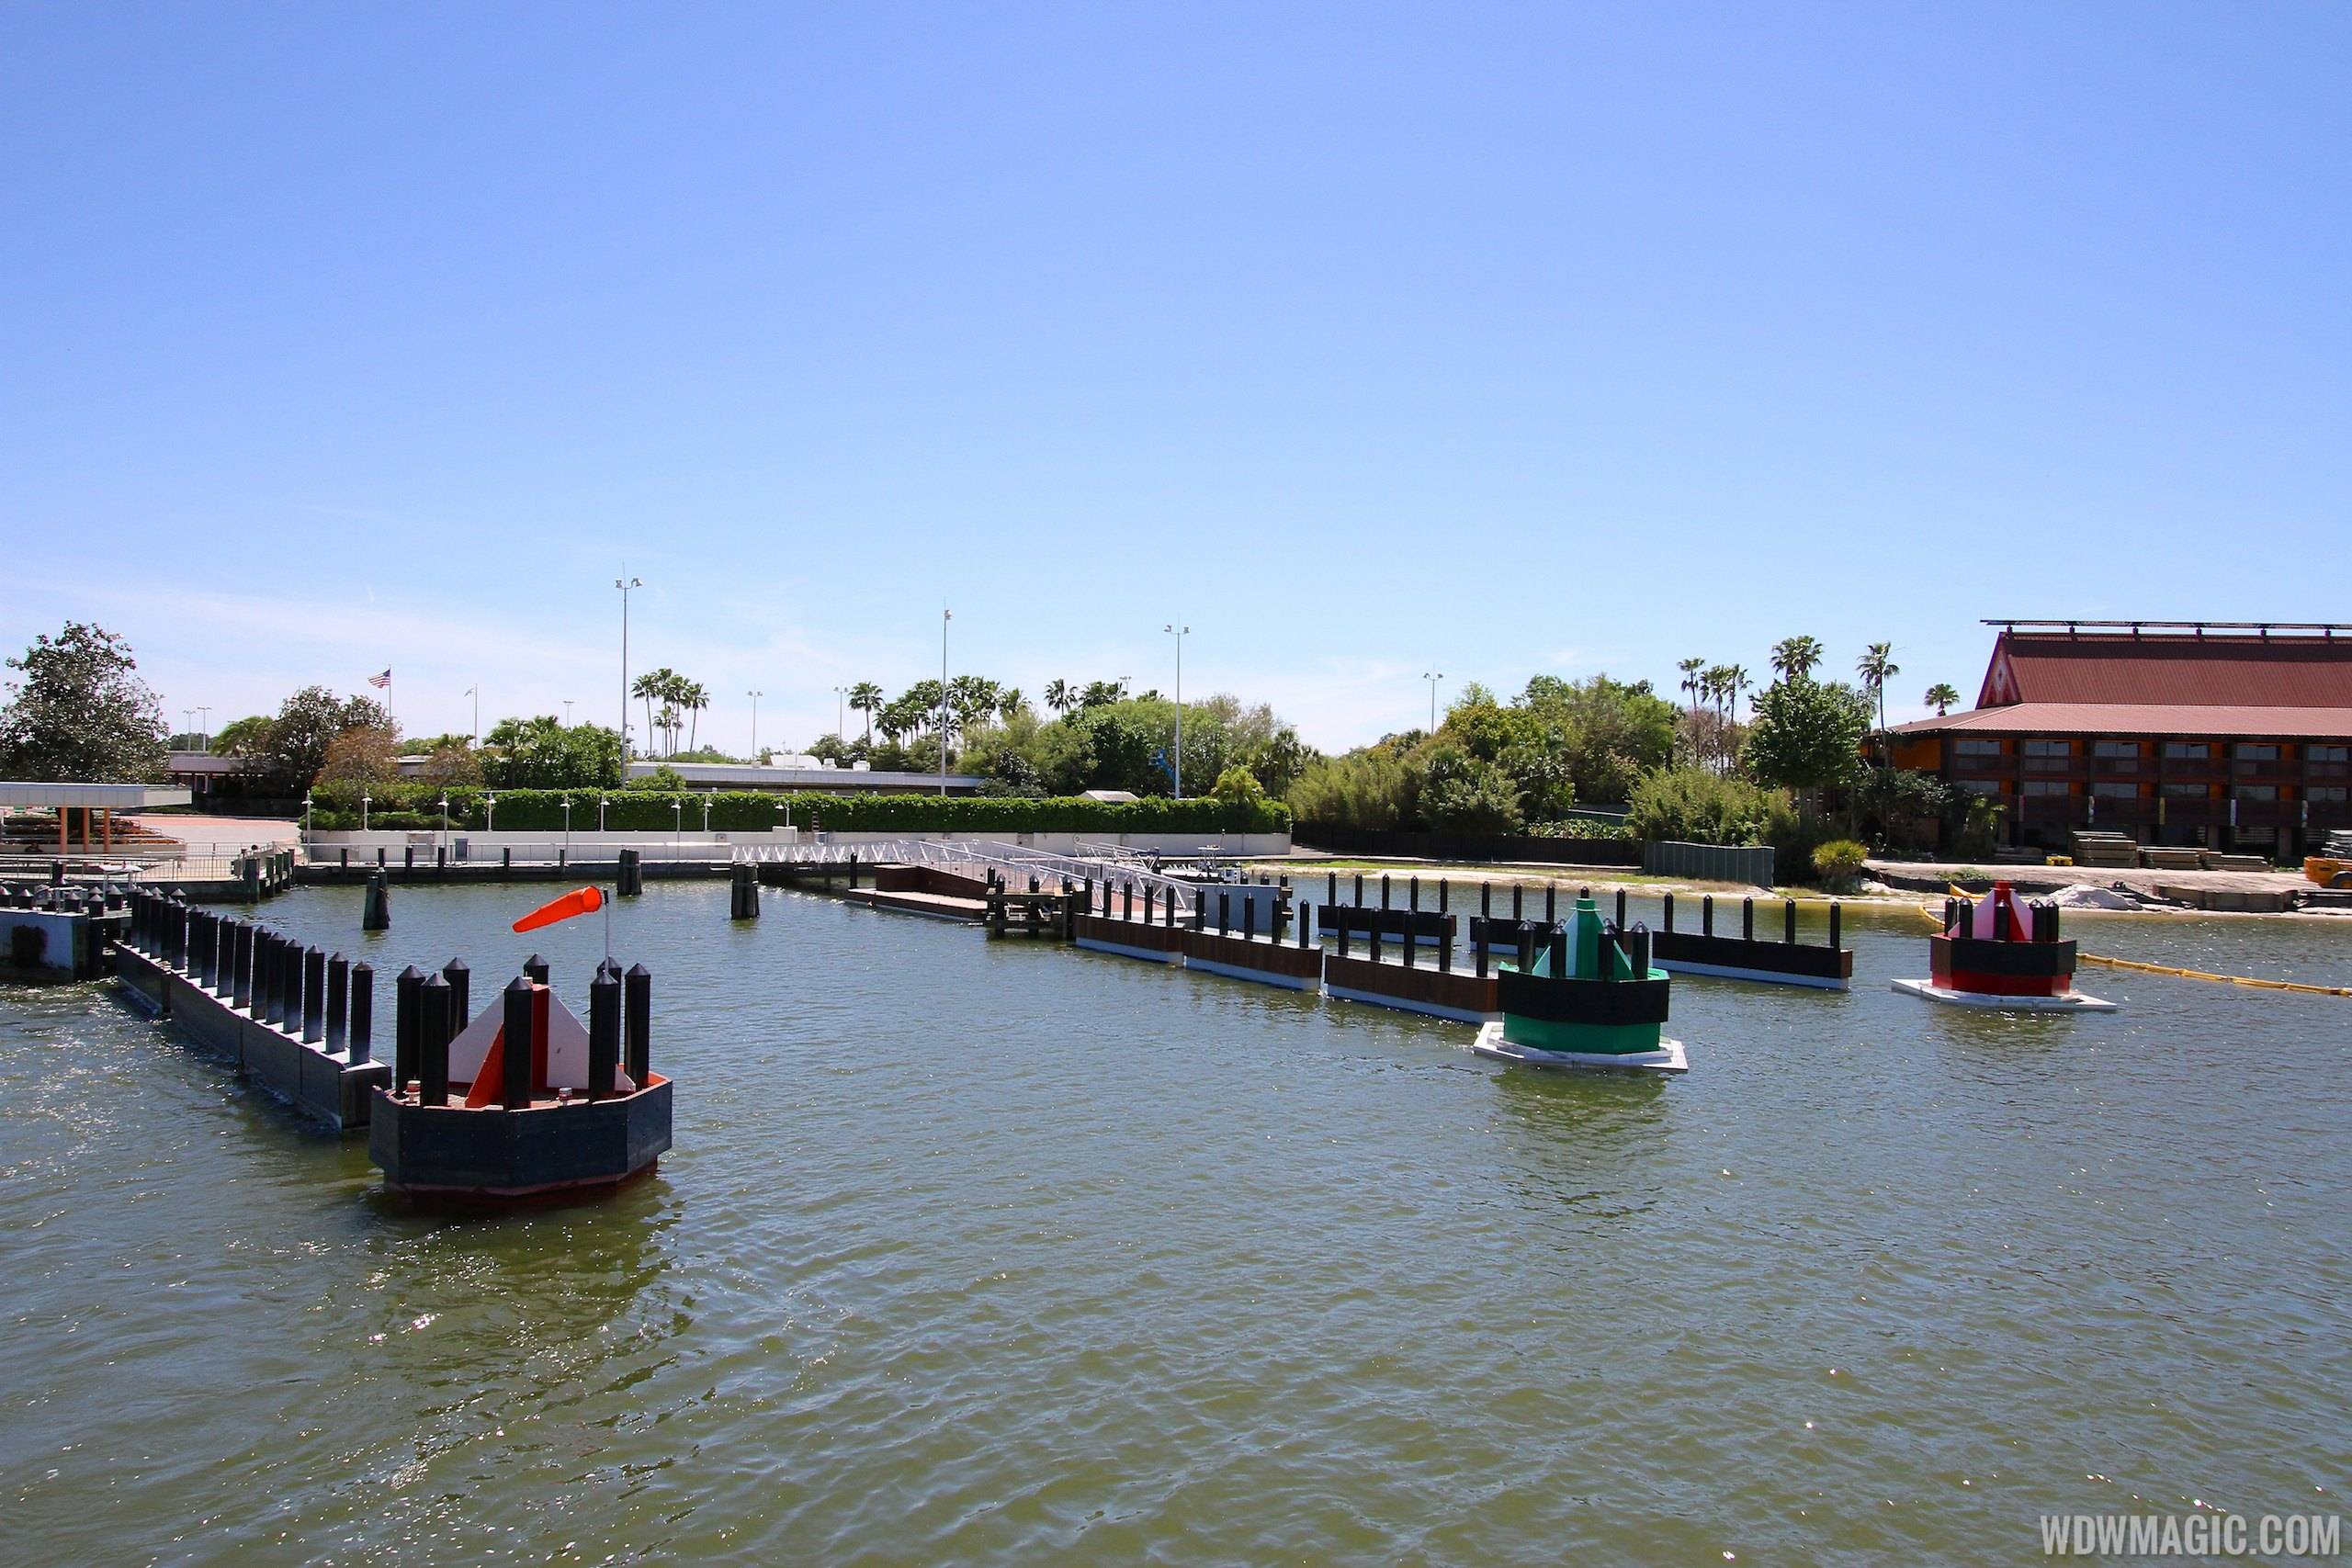 Completed second ferry boat docks at the Magic Kingdom and TTC